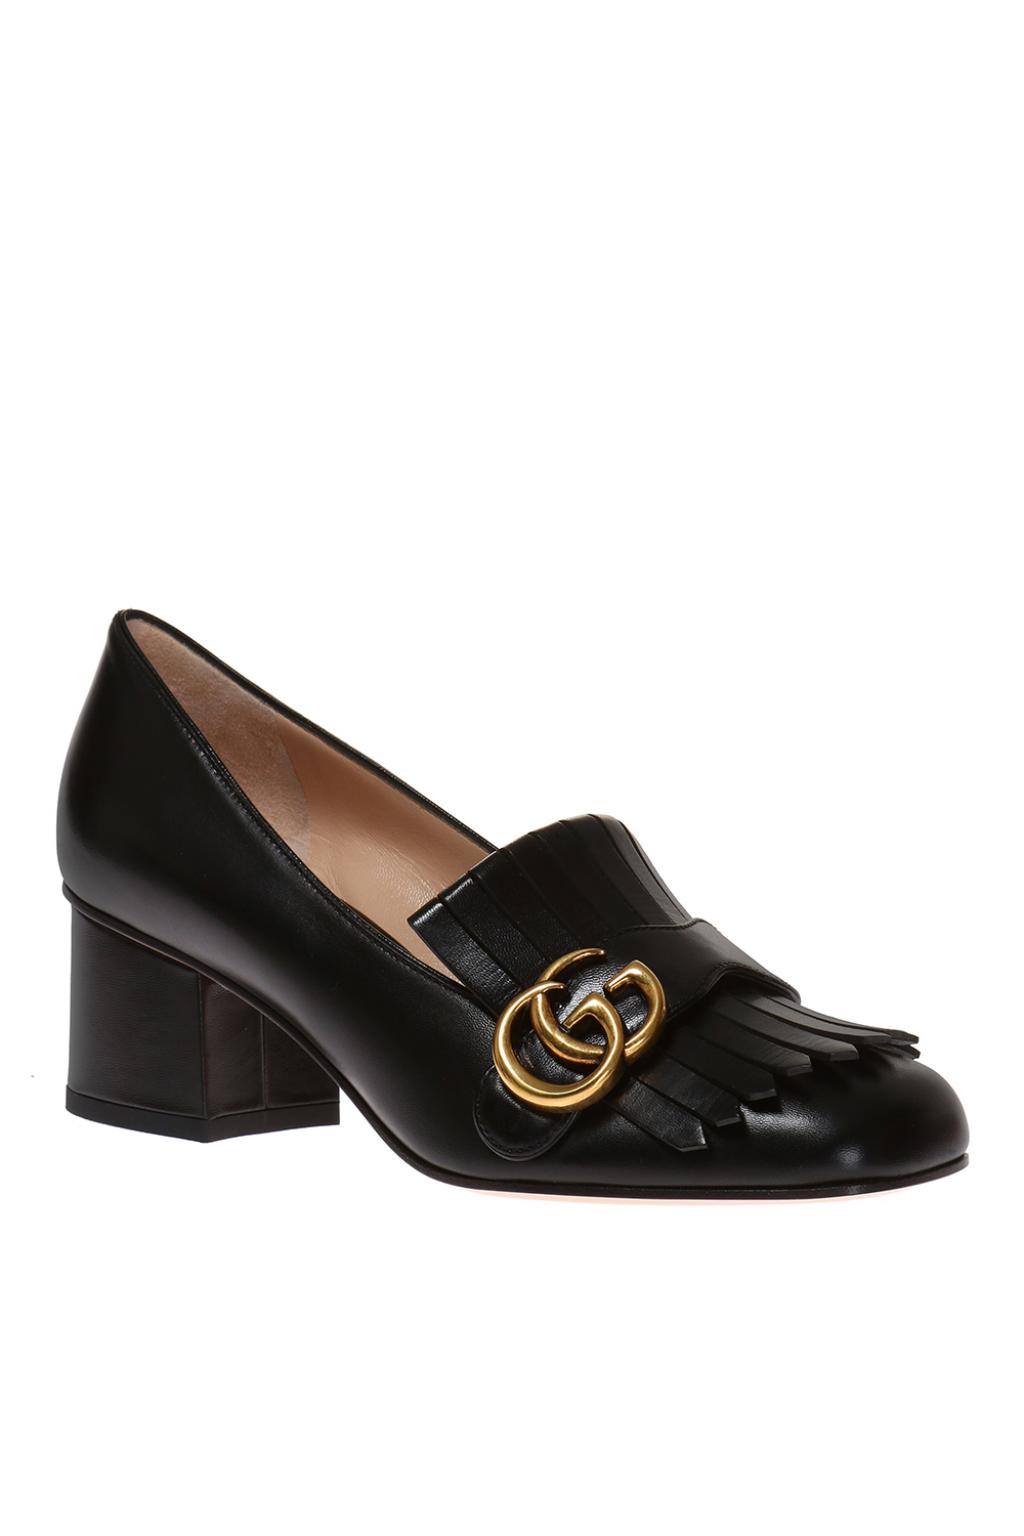 gucci stacked heel loafer